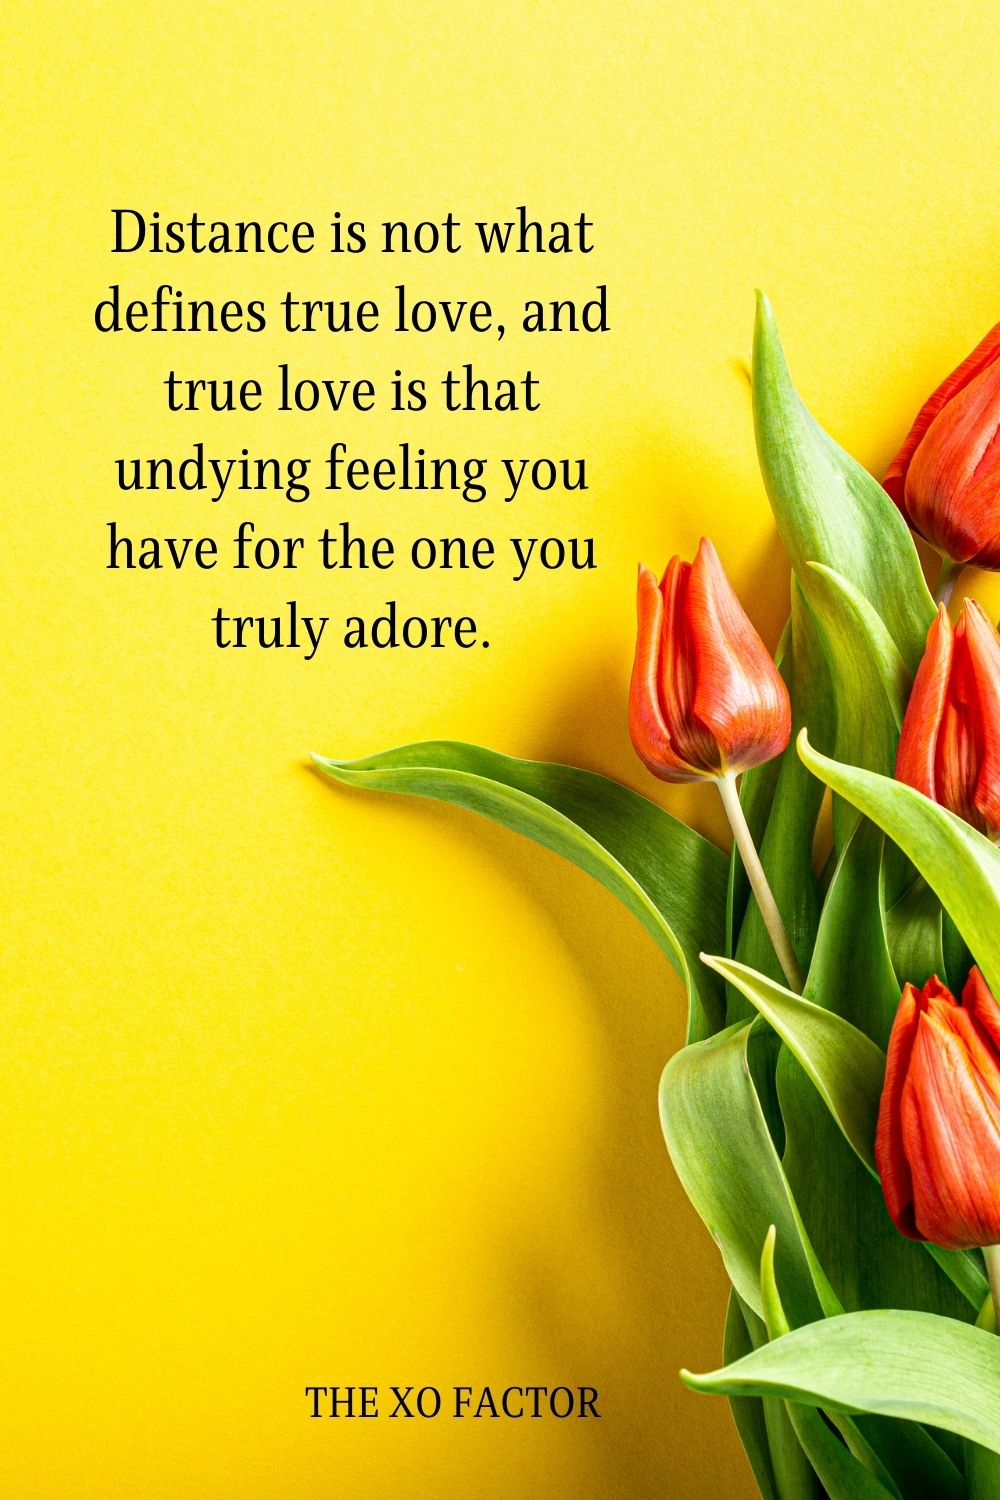 Distance is not what defines true love, and true love is that undying feeling you have for the one you truly adore.